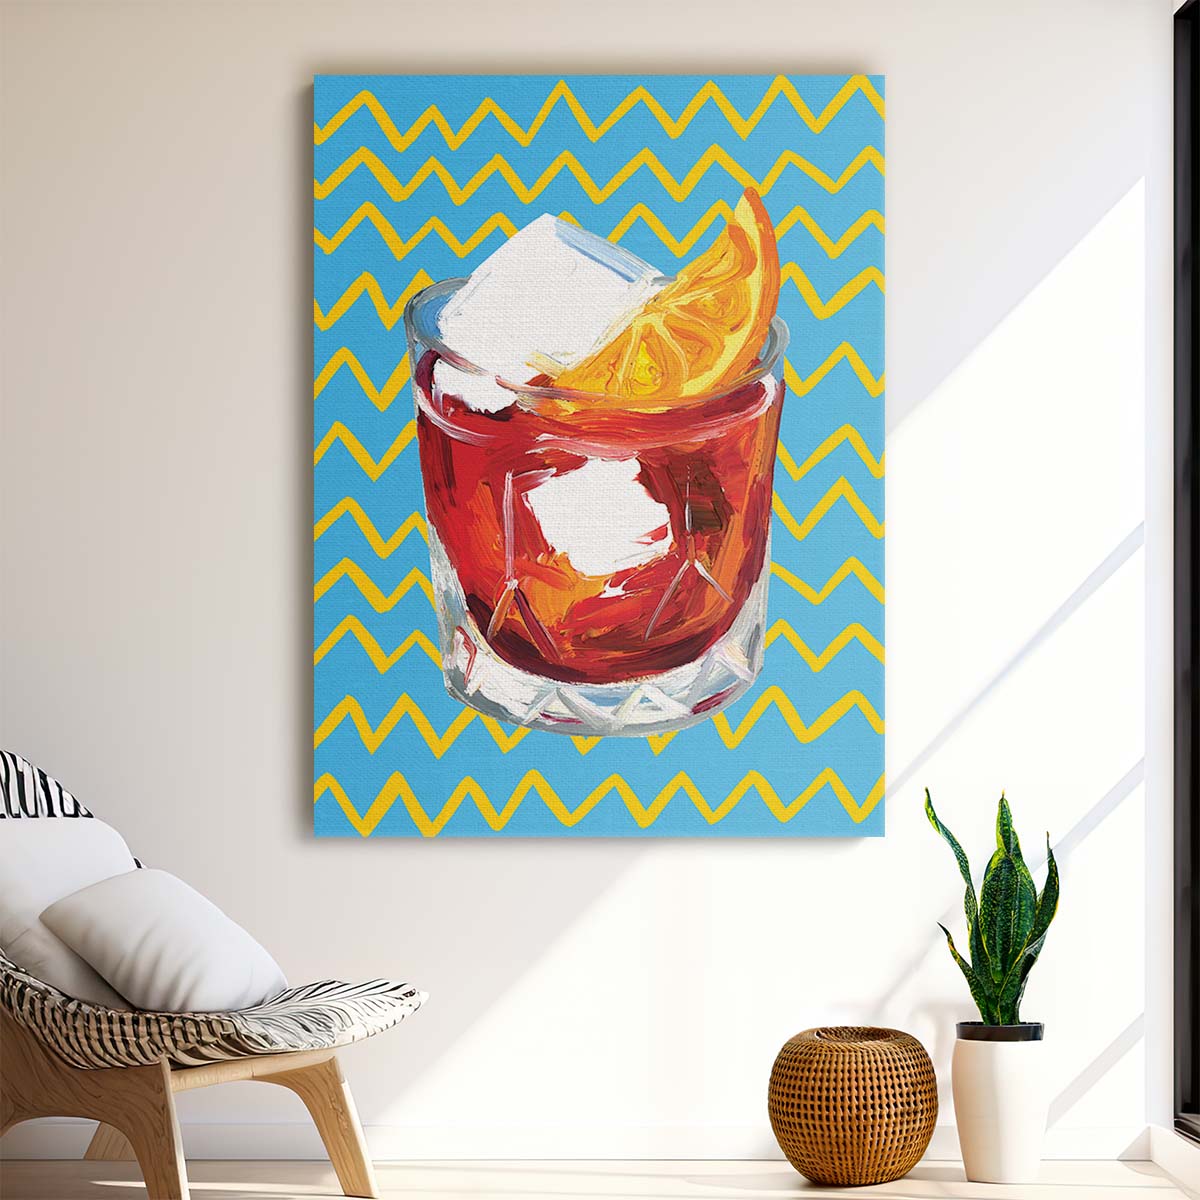 Blue Negroni Cocktail Abstract Geometric Illustration Wall Art by Luxuriance Designs, made in USA